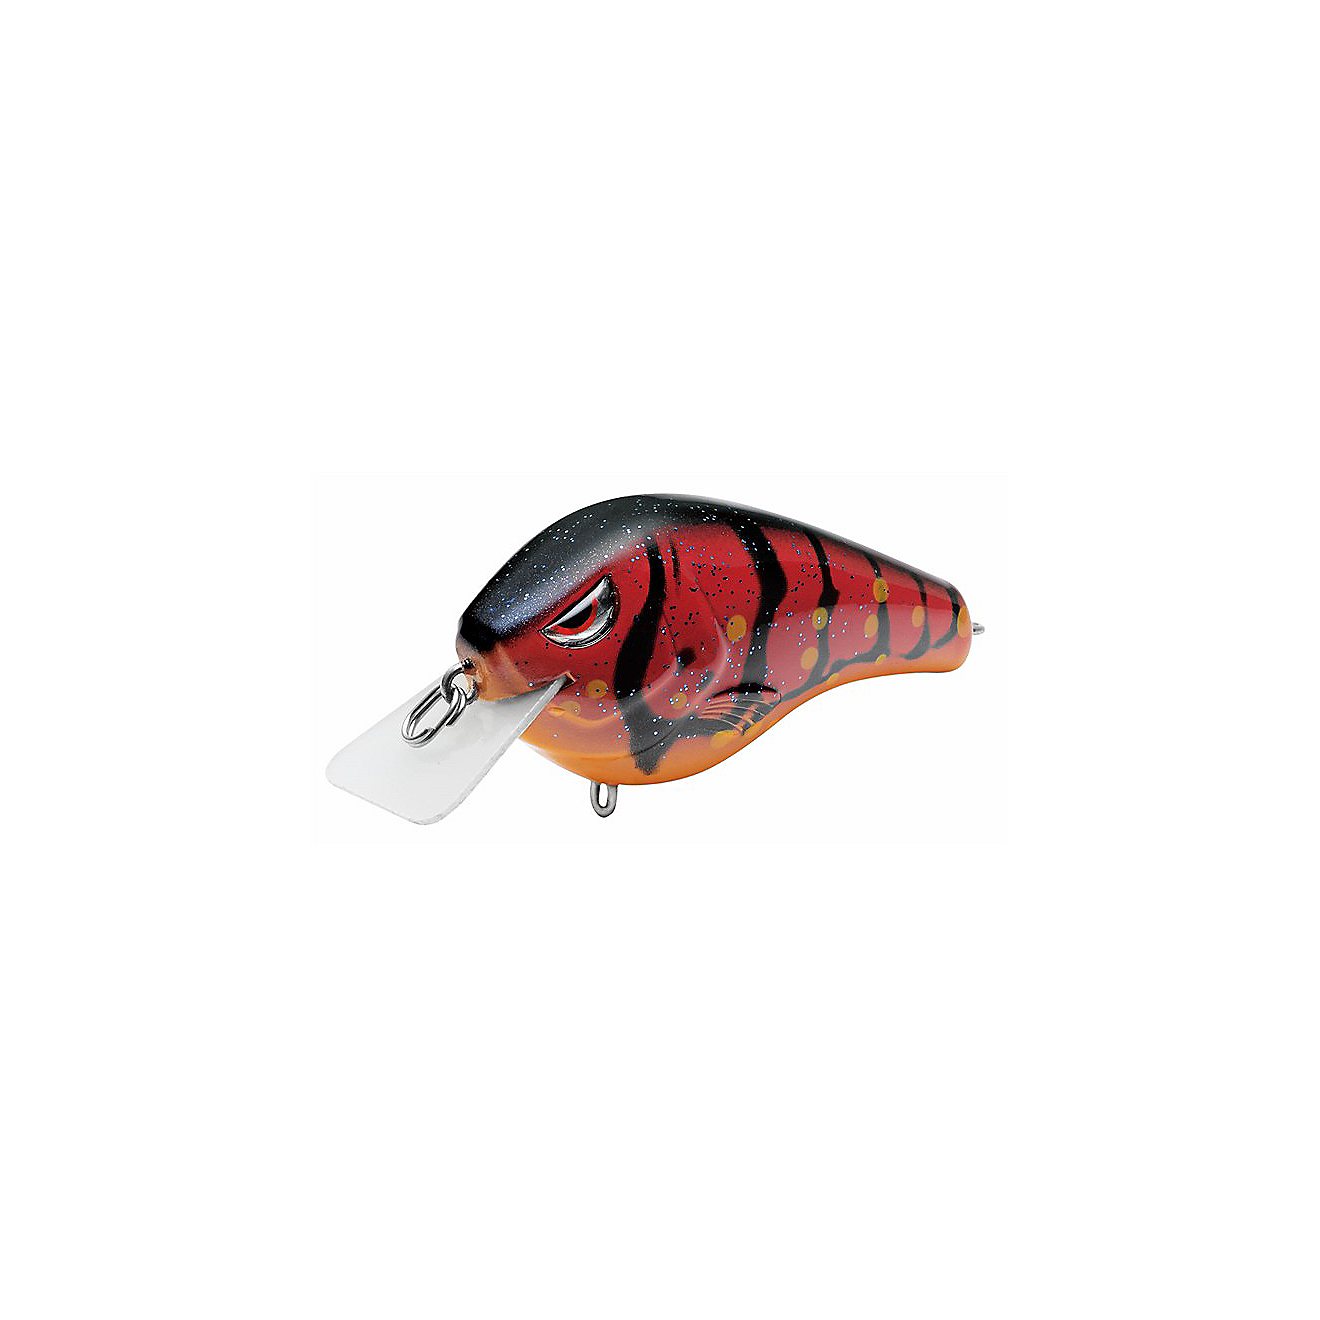 SPRO Fat Papa Square Bill 55 Crankbait                                                                                           - view number 1